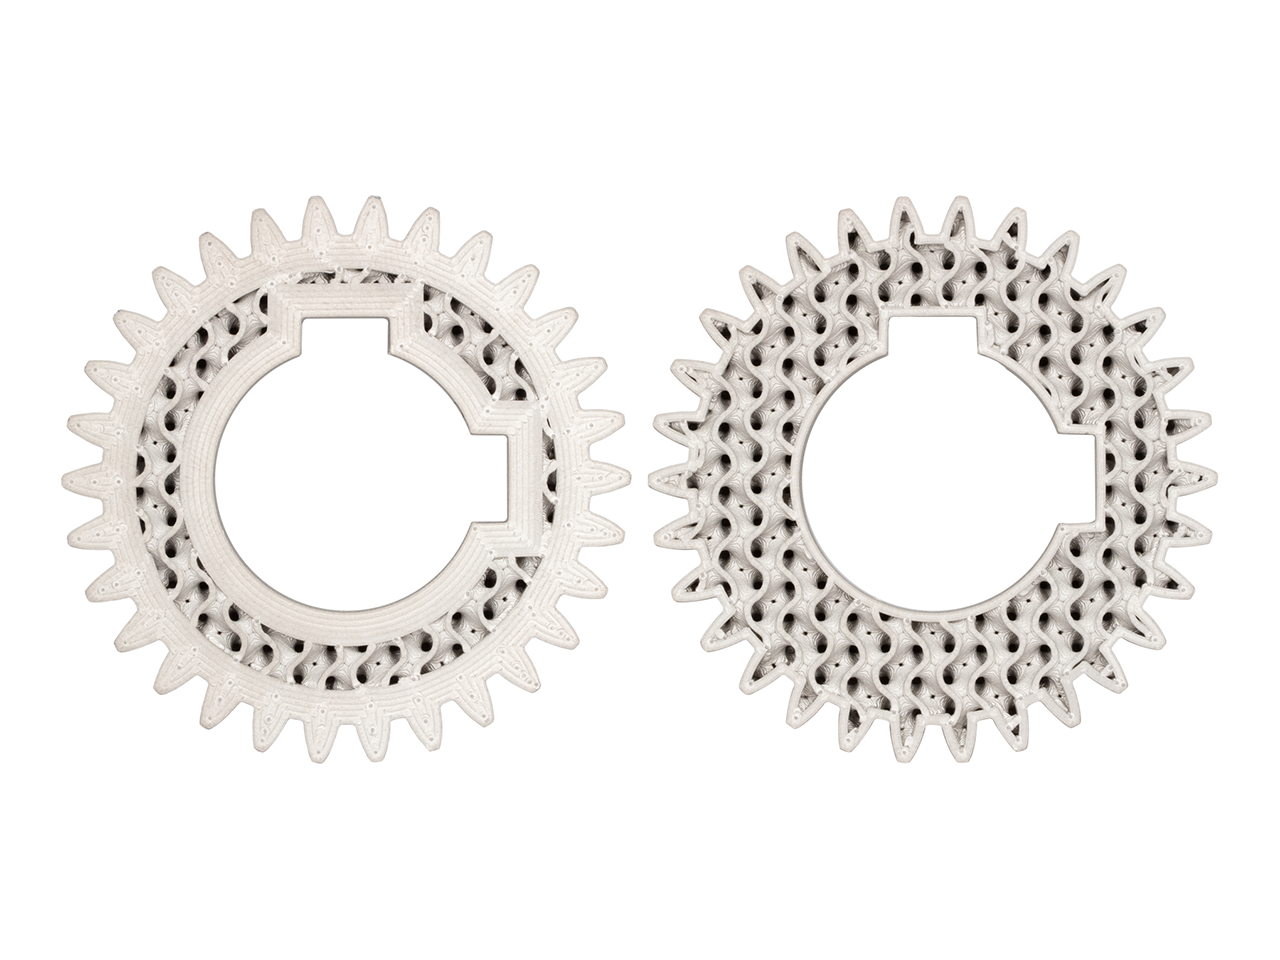 Sectioned gears revealing infill structure and varying shell thickness